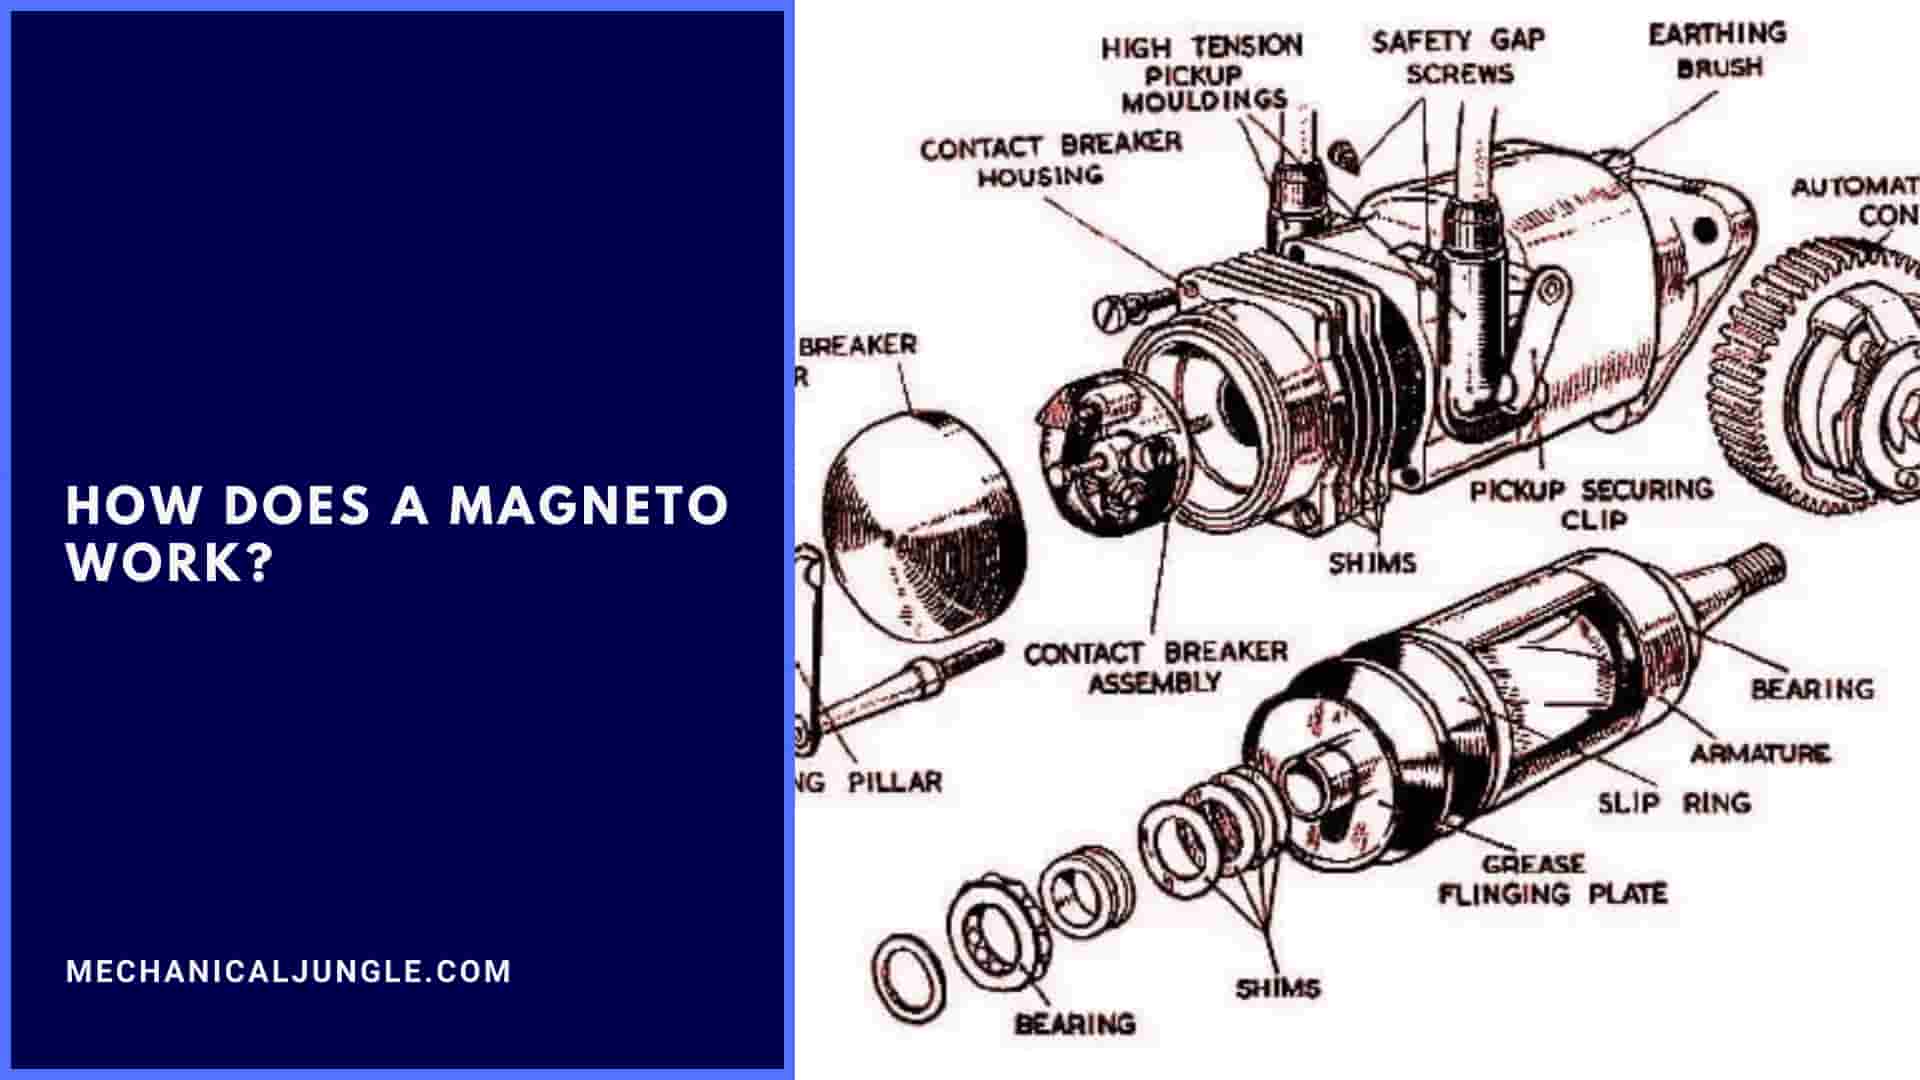 How Does a Magneto Work?